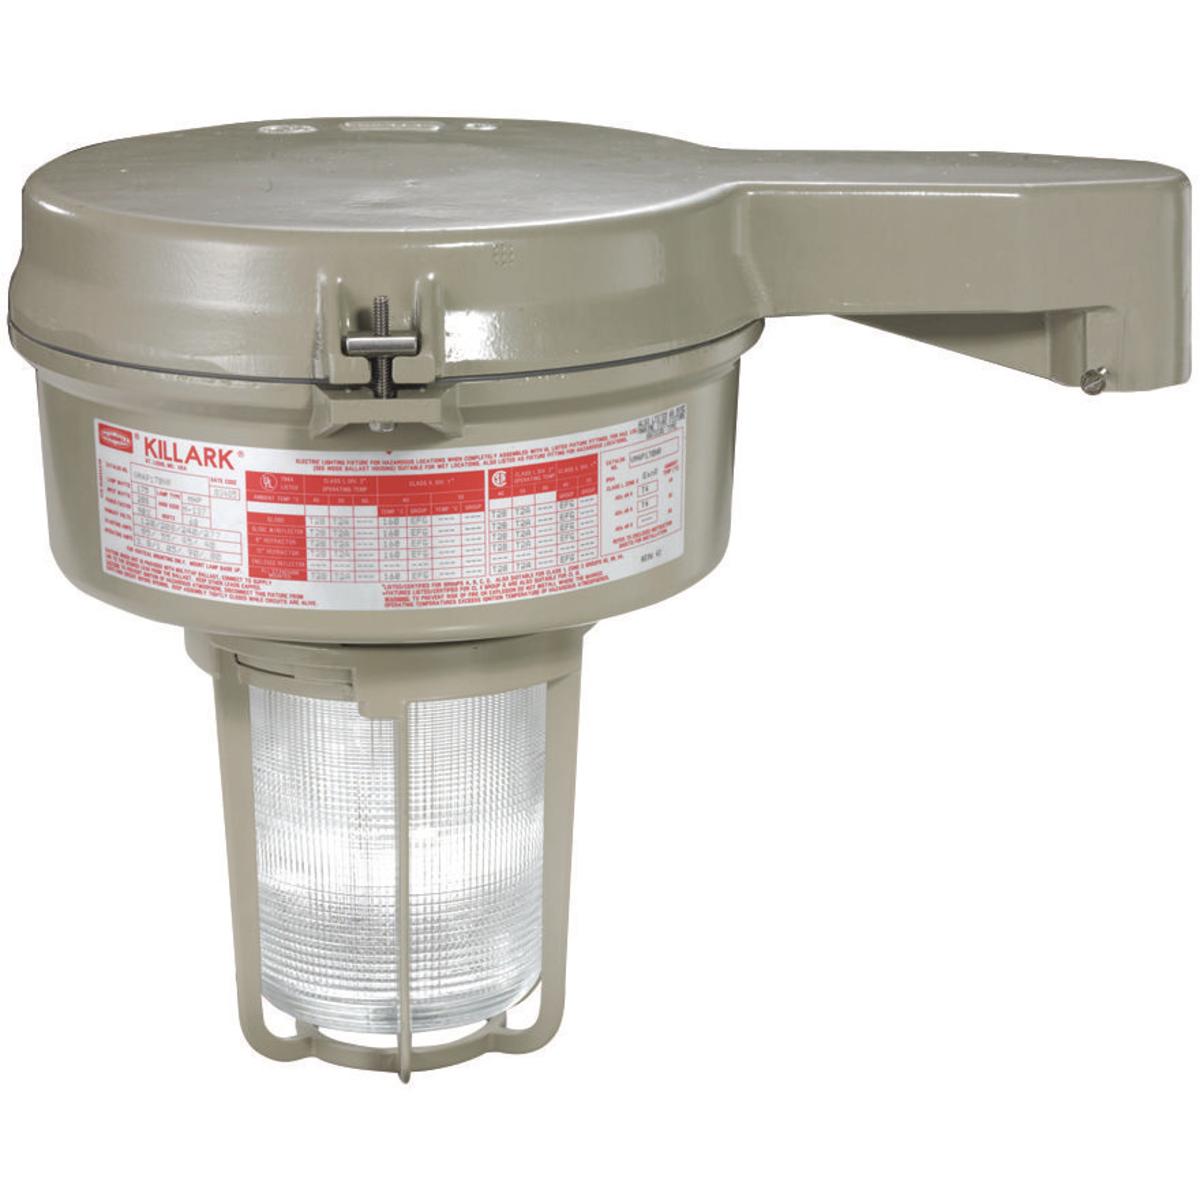 Hubbell VM3P205S5GLG VM3 Series - 200W Metal Halide 480V - 1/1/2" Stanchion Mount - Globe and Guard  ; Ballast tank and splice box – corrosion resistant copper-free aluminum alloy with baked powder epoxy/polyester finish, electrostatically applied for complete, uniform corros